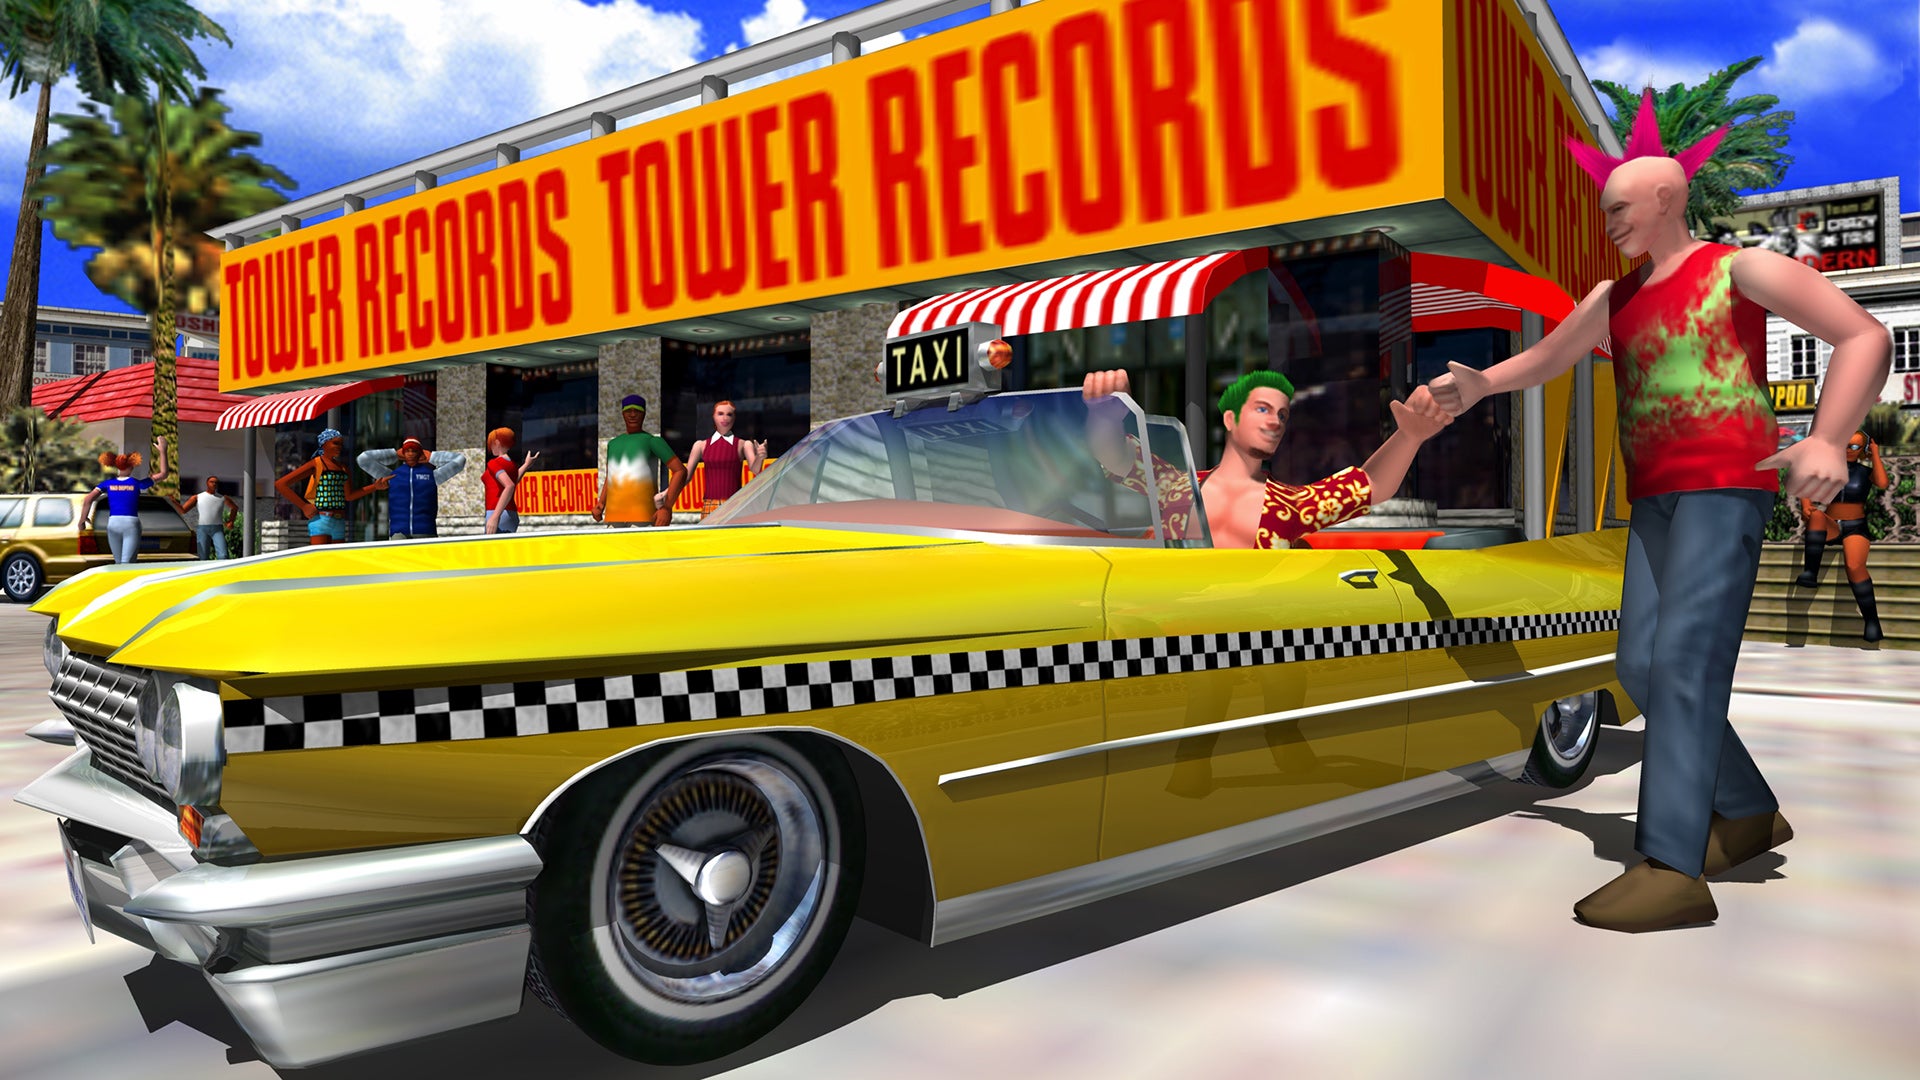 Crazy Taxi is back and has a lot going for it